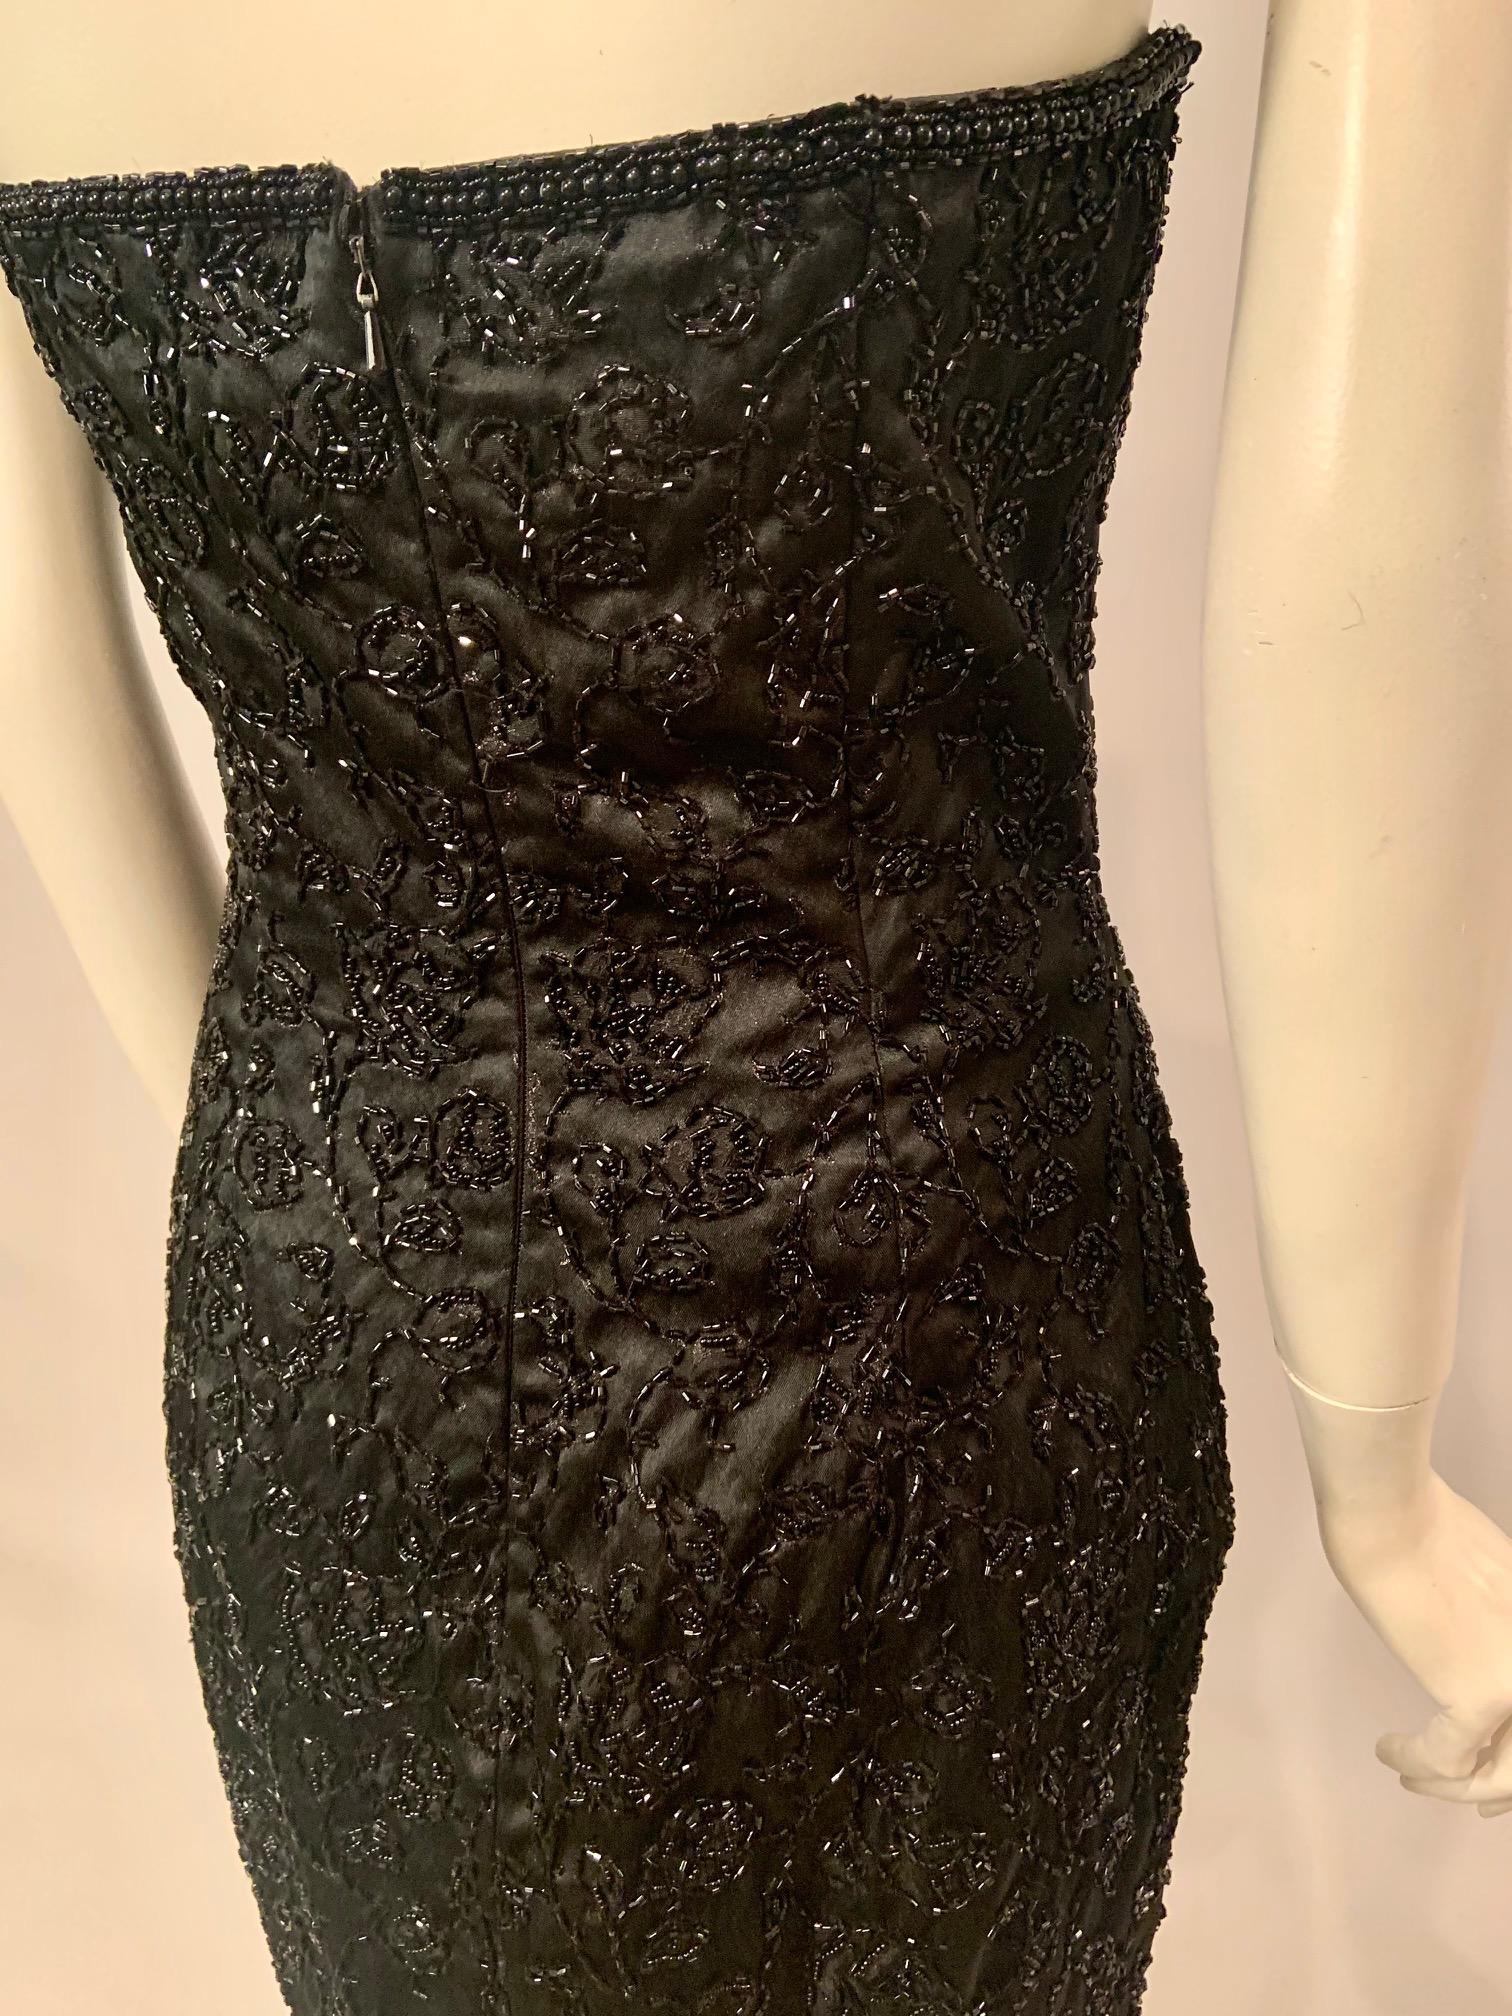 Elaborately Beaded Strapless Black Cocktail Dress and Jacket  circa 1950 For Sale 4